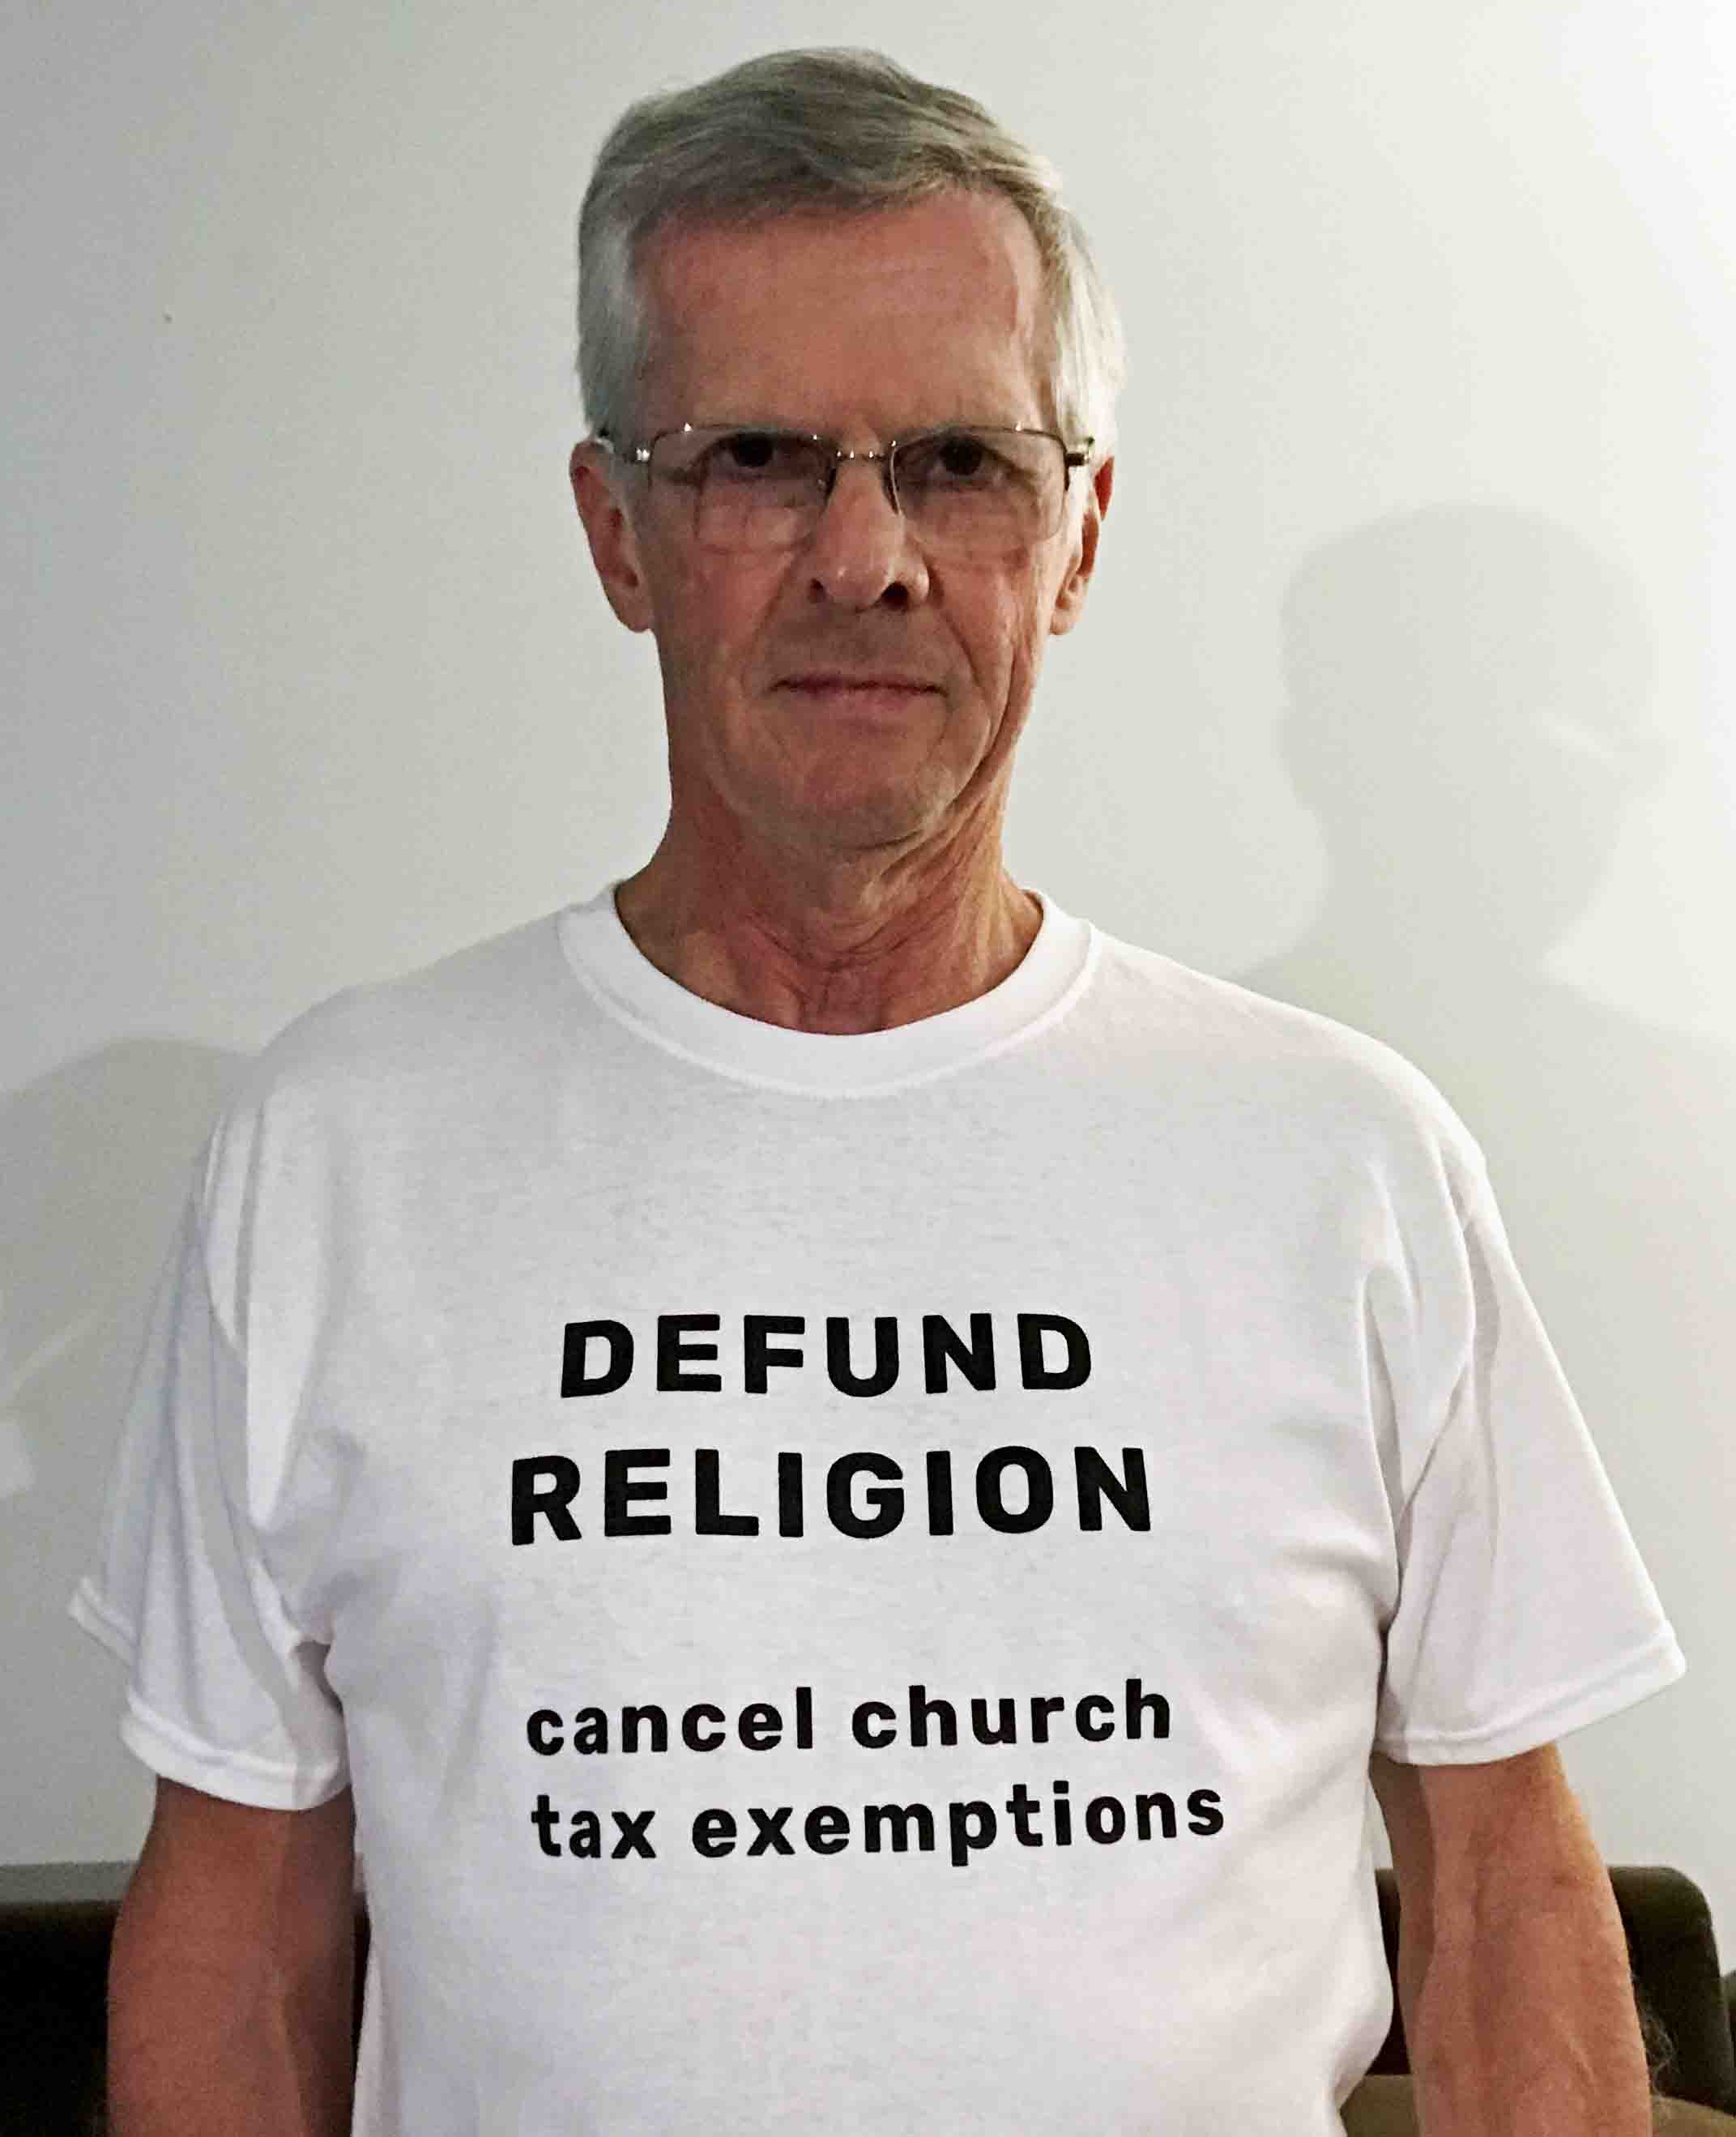 Darwin Bedford wearing his shirt that says 'DEFUND RELIGION cancel church tax exemptions'